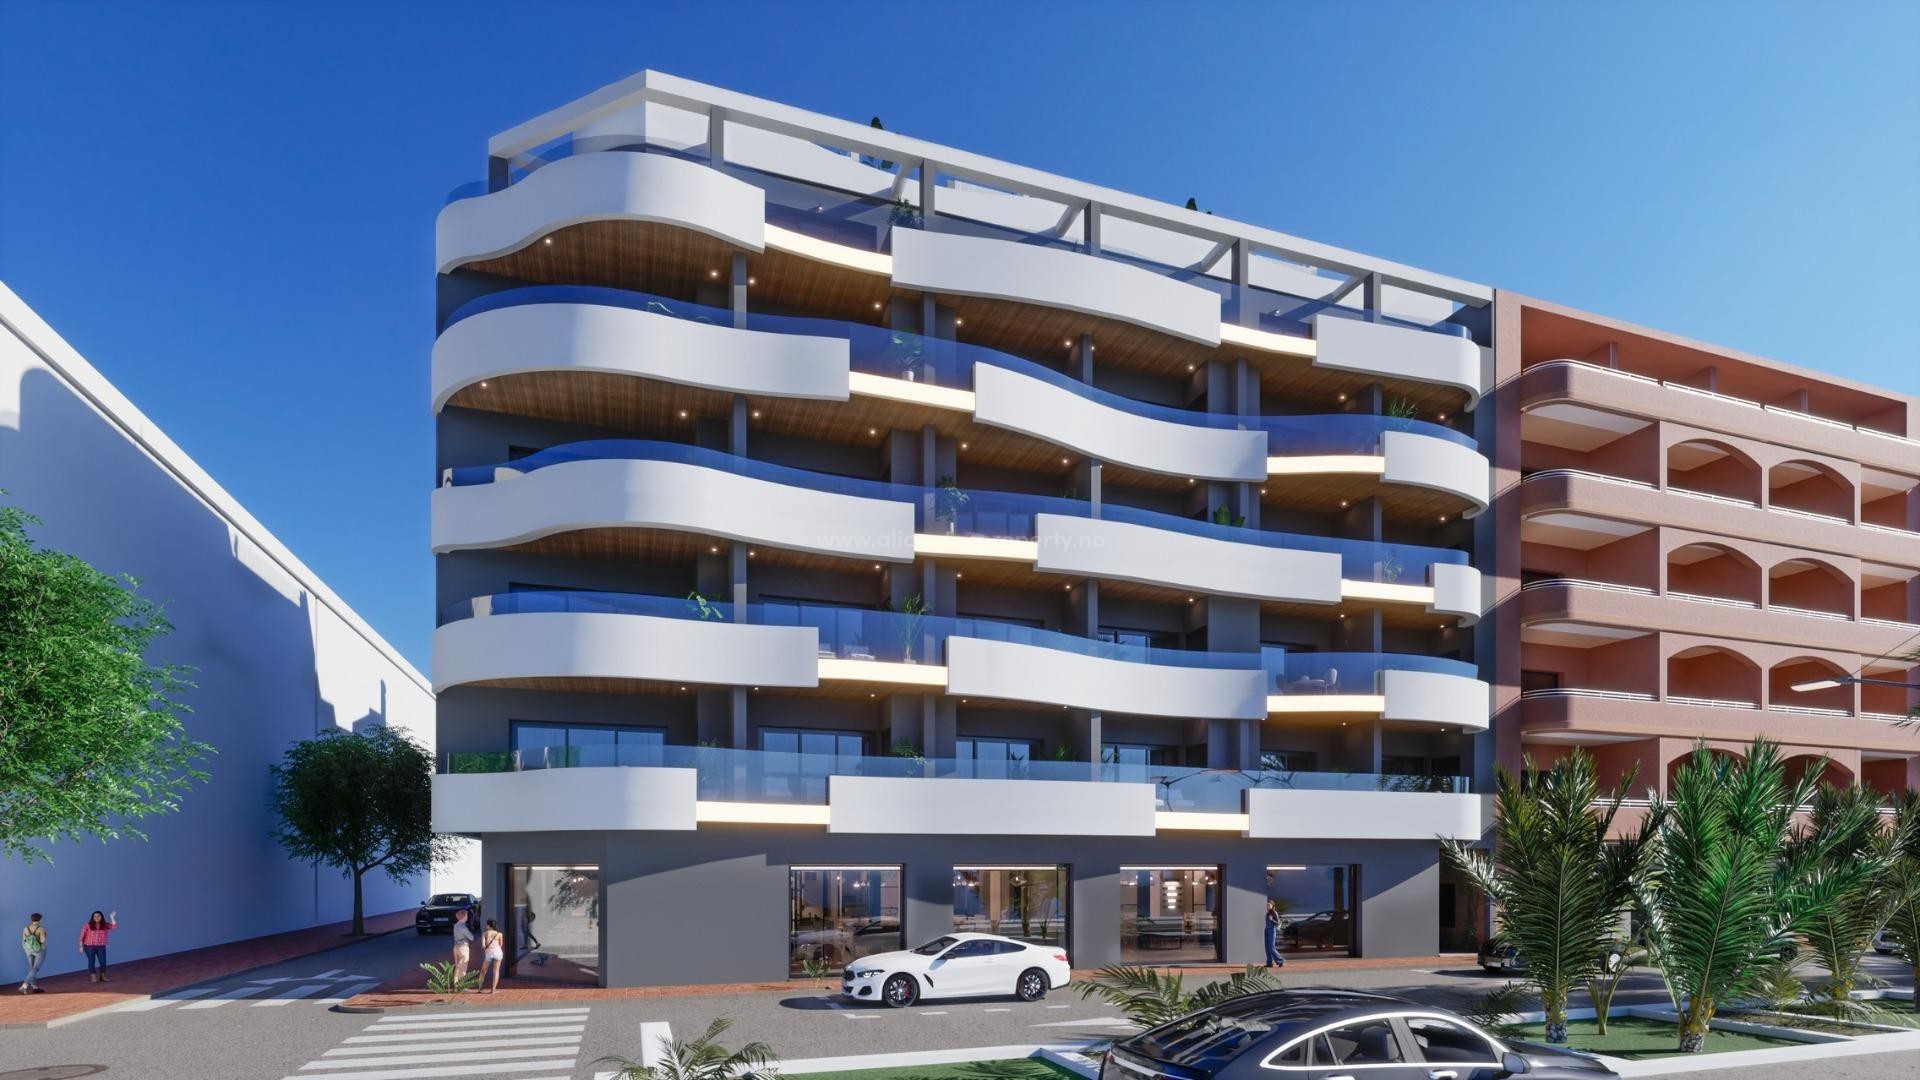 34 different exclusive stylish apartments in the center of Torrevieja, penthouses with fantastic panoramic views